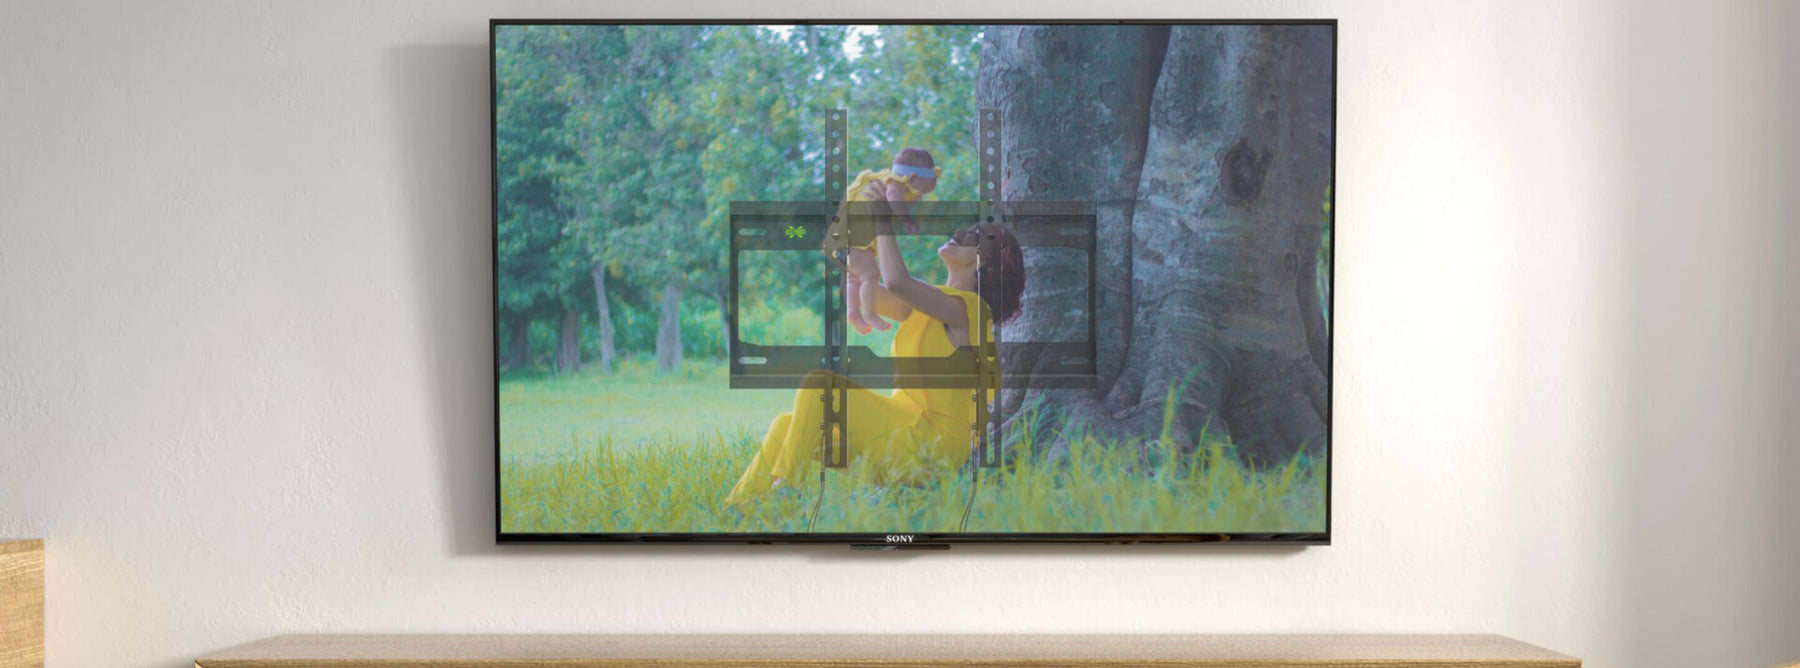 Finding the Perfect Fit: Exploring the Best TV mounts for a 60-Inch TV